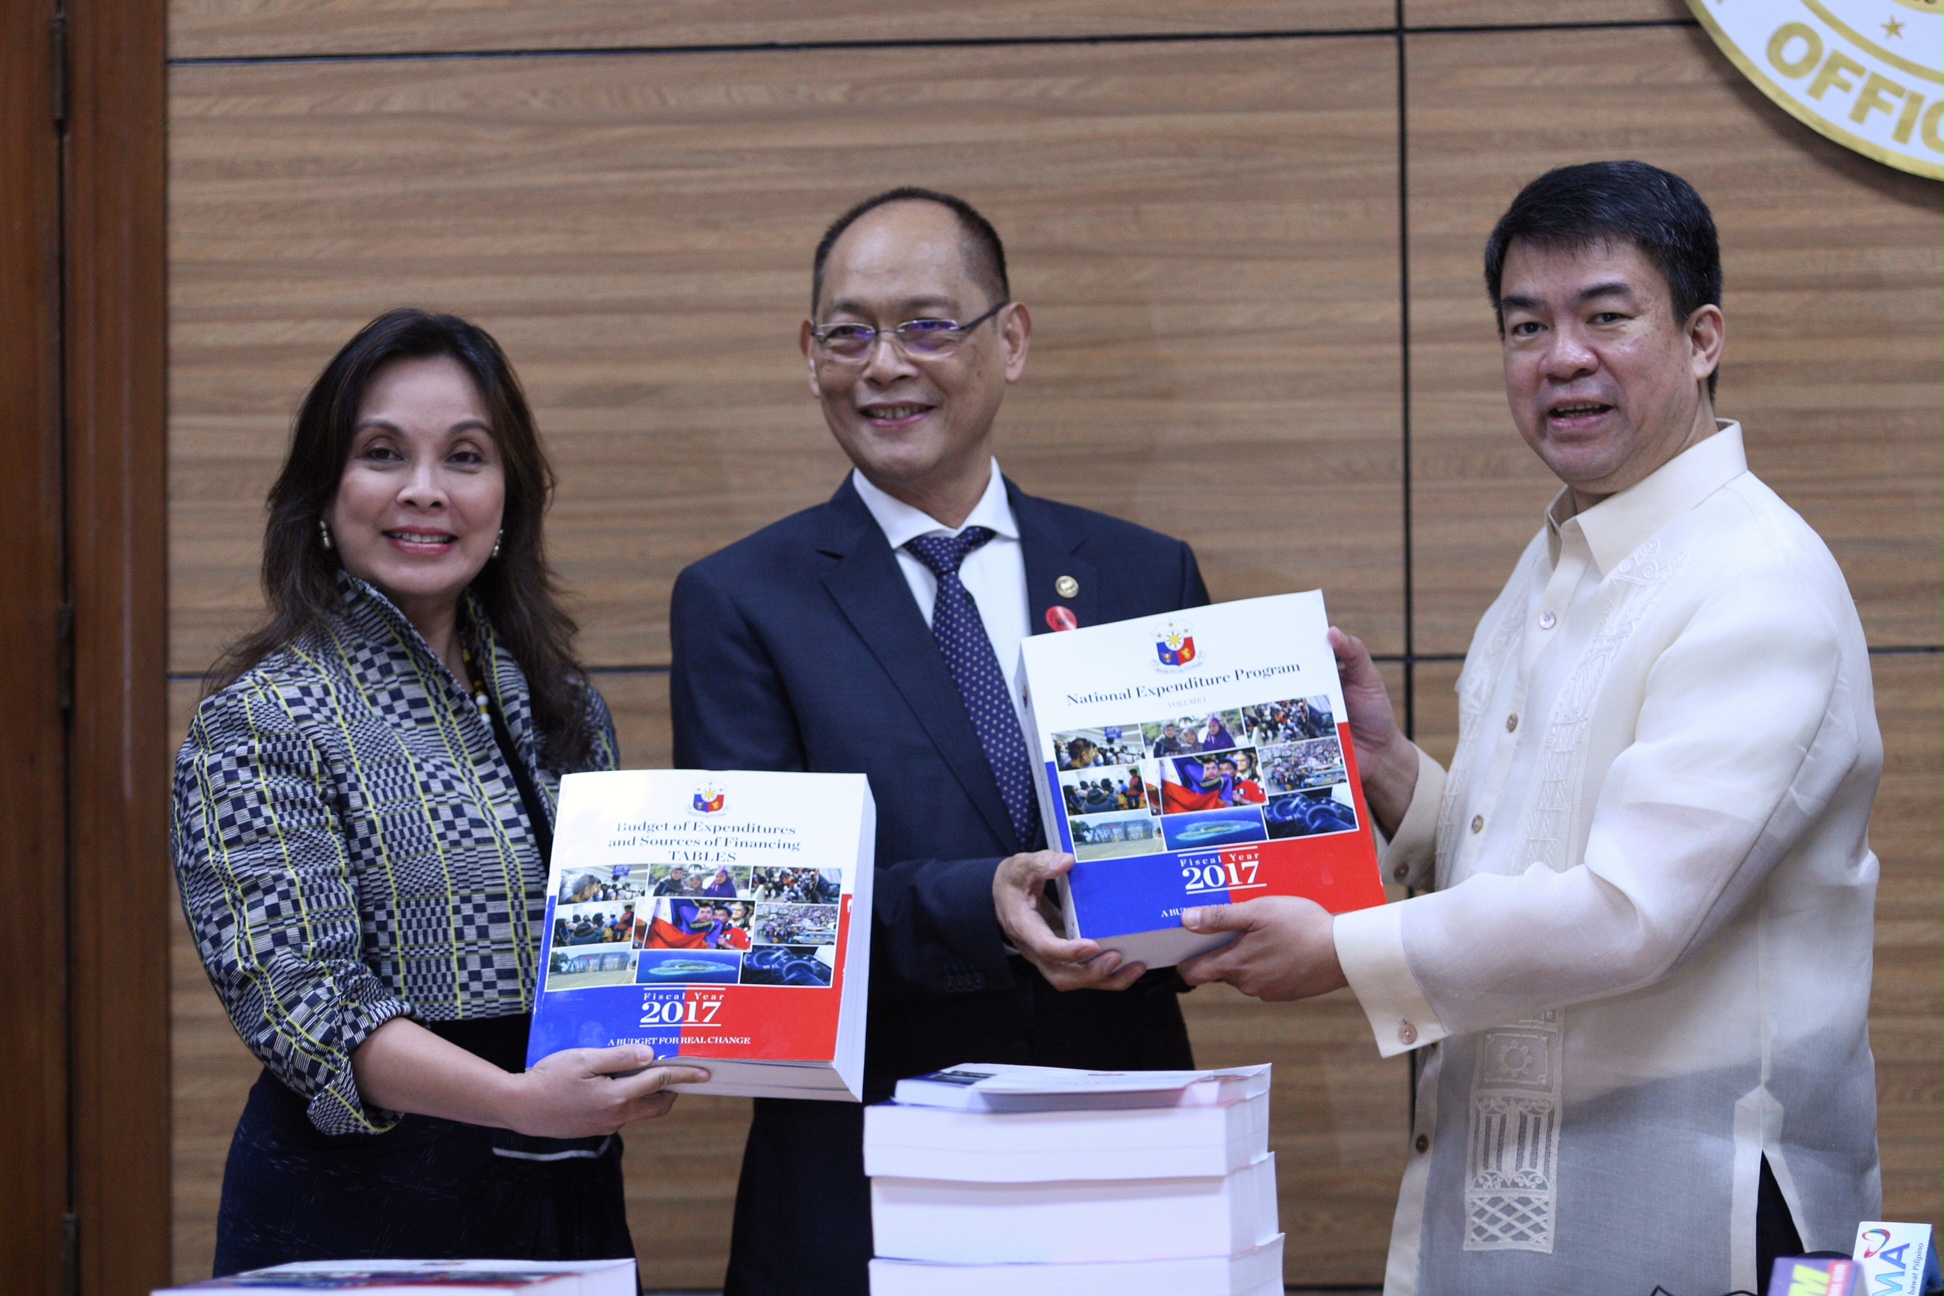 Turnover of 2017 Proposed National Expenditure Program (NEP) to the Senate